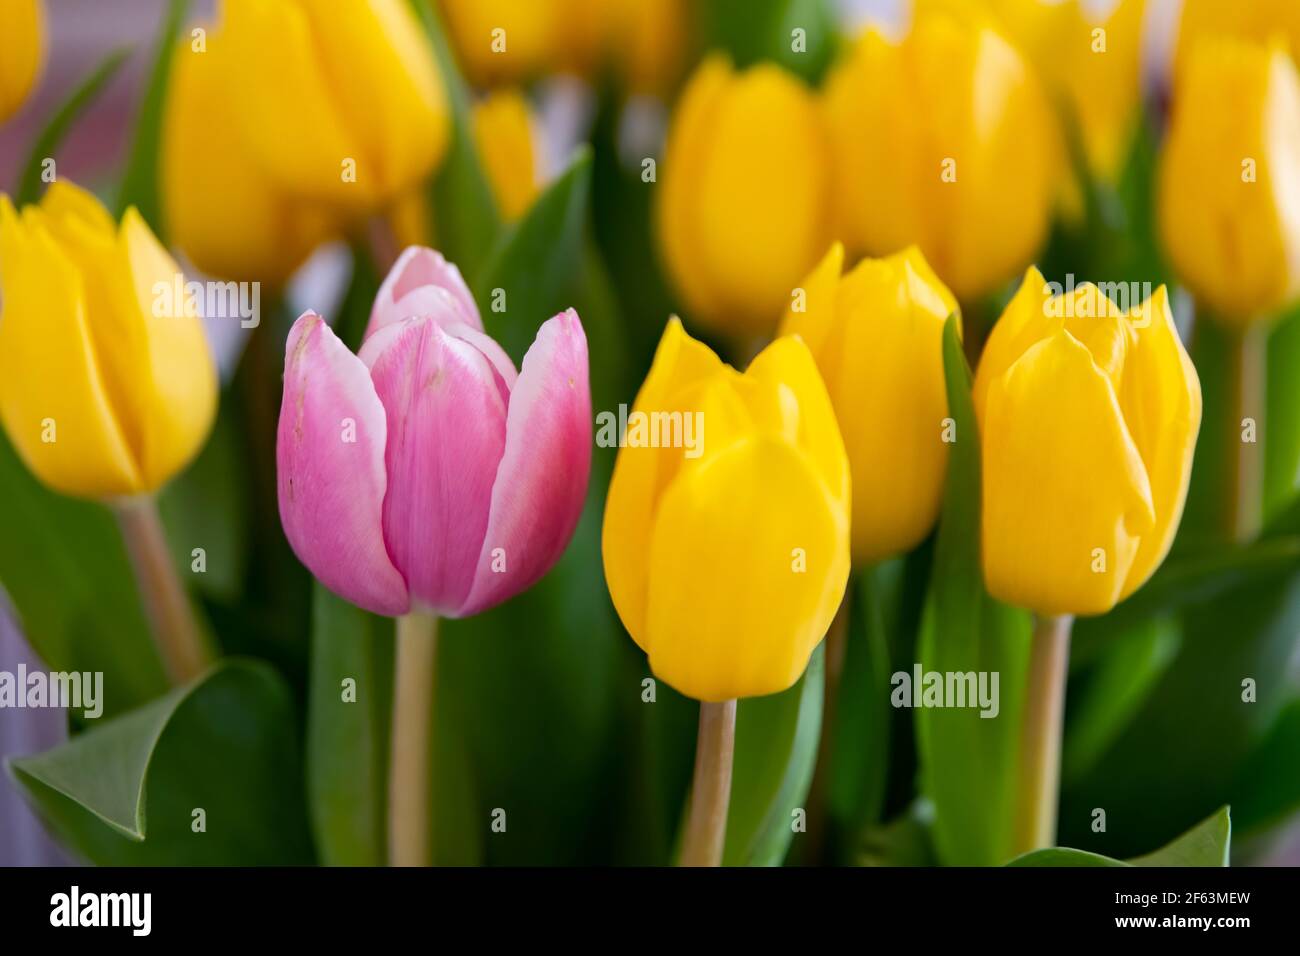 Close up of pink tulip flower between yellow colored tulips on field with a bokeh or blurred  background. Stock Photo